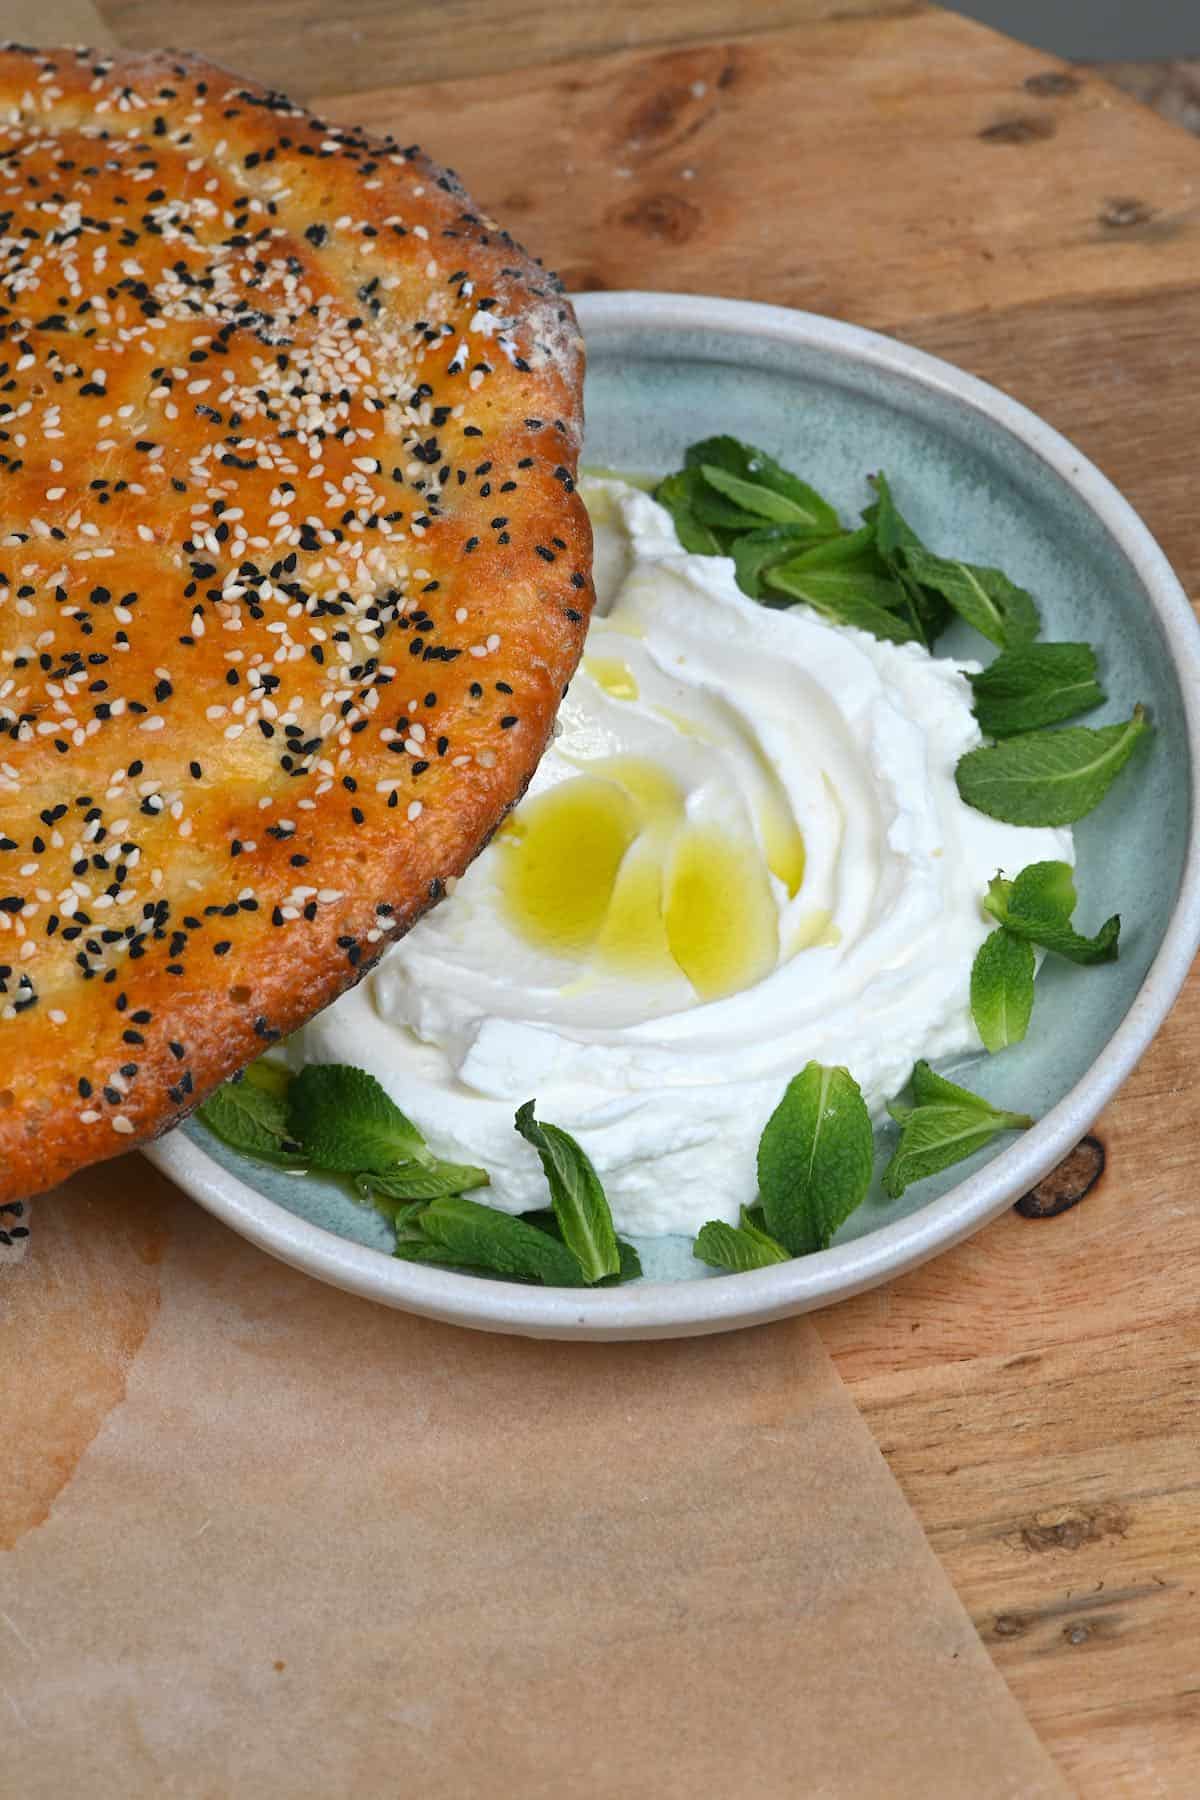 Pide bread and a bowl with labhen and mint leaves